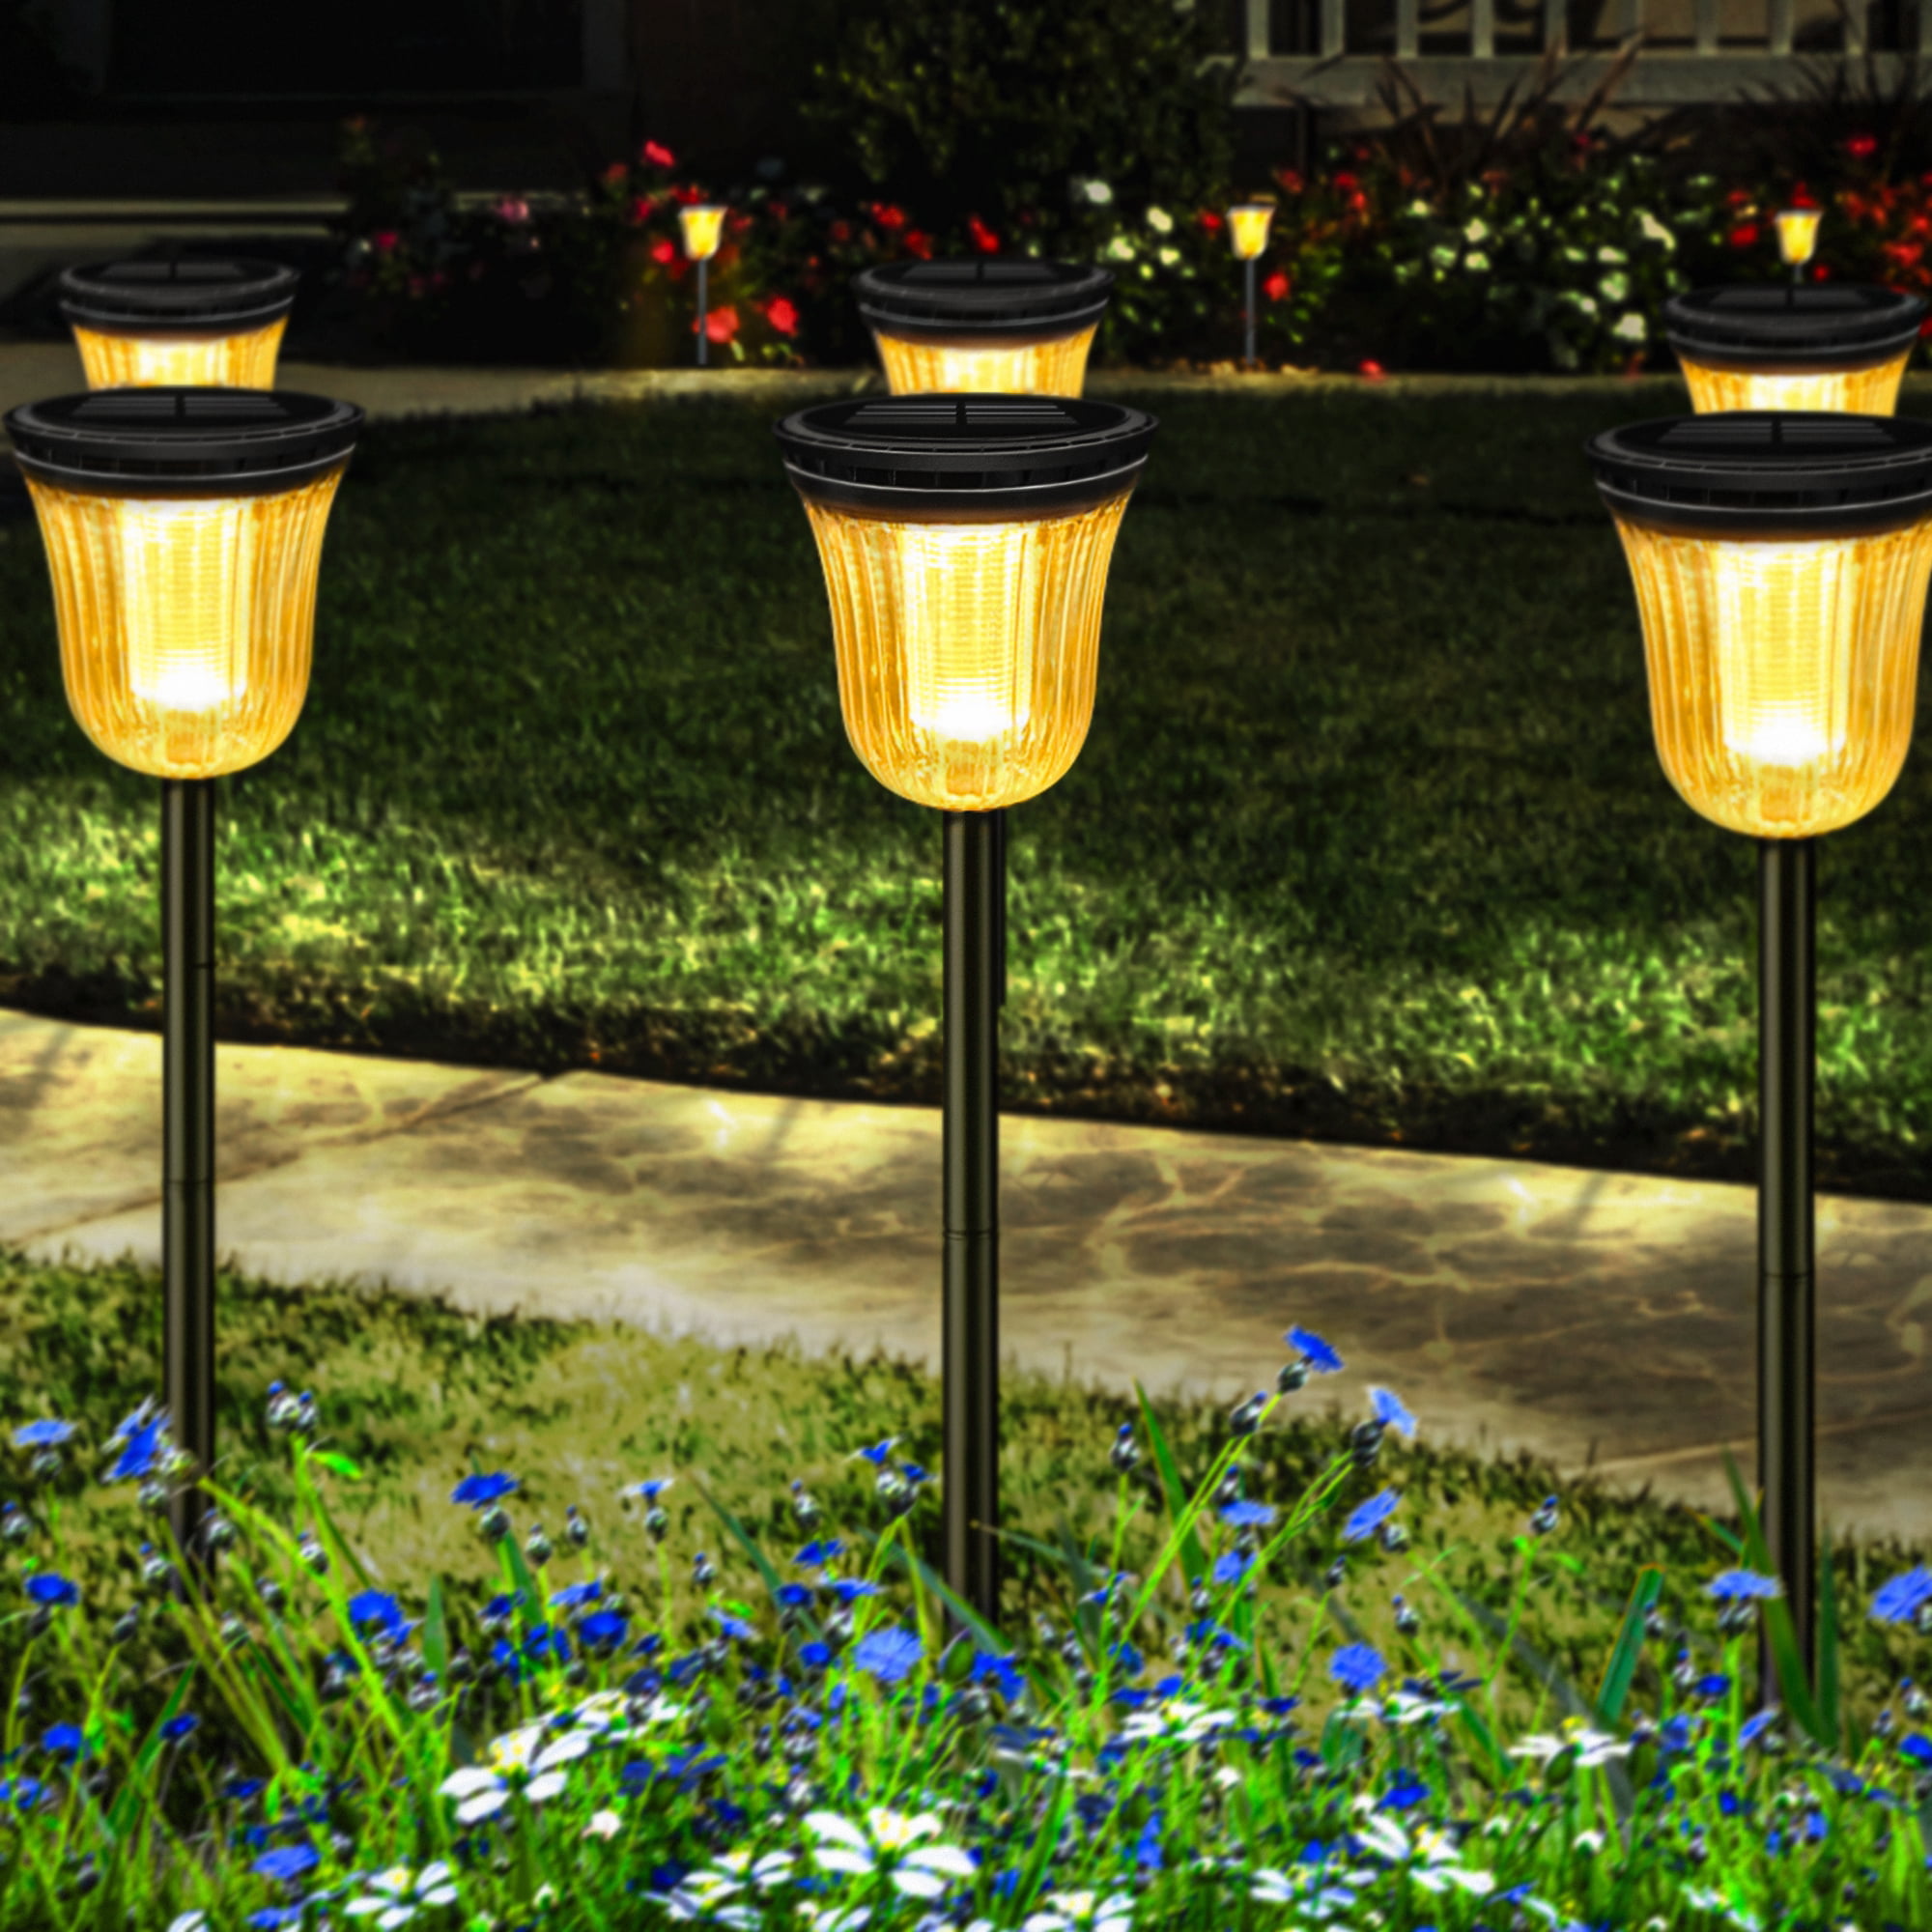 Details about   Outdoor Solar Powered 30 LED String Light Drop Icicle Garden Waterproof Decor US 